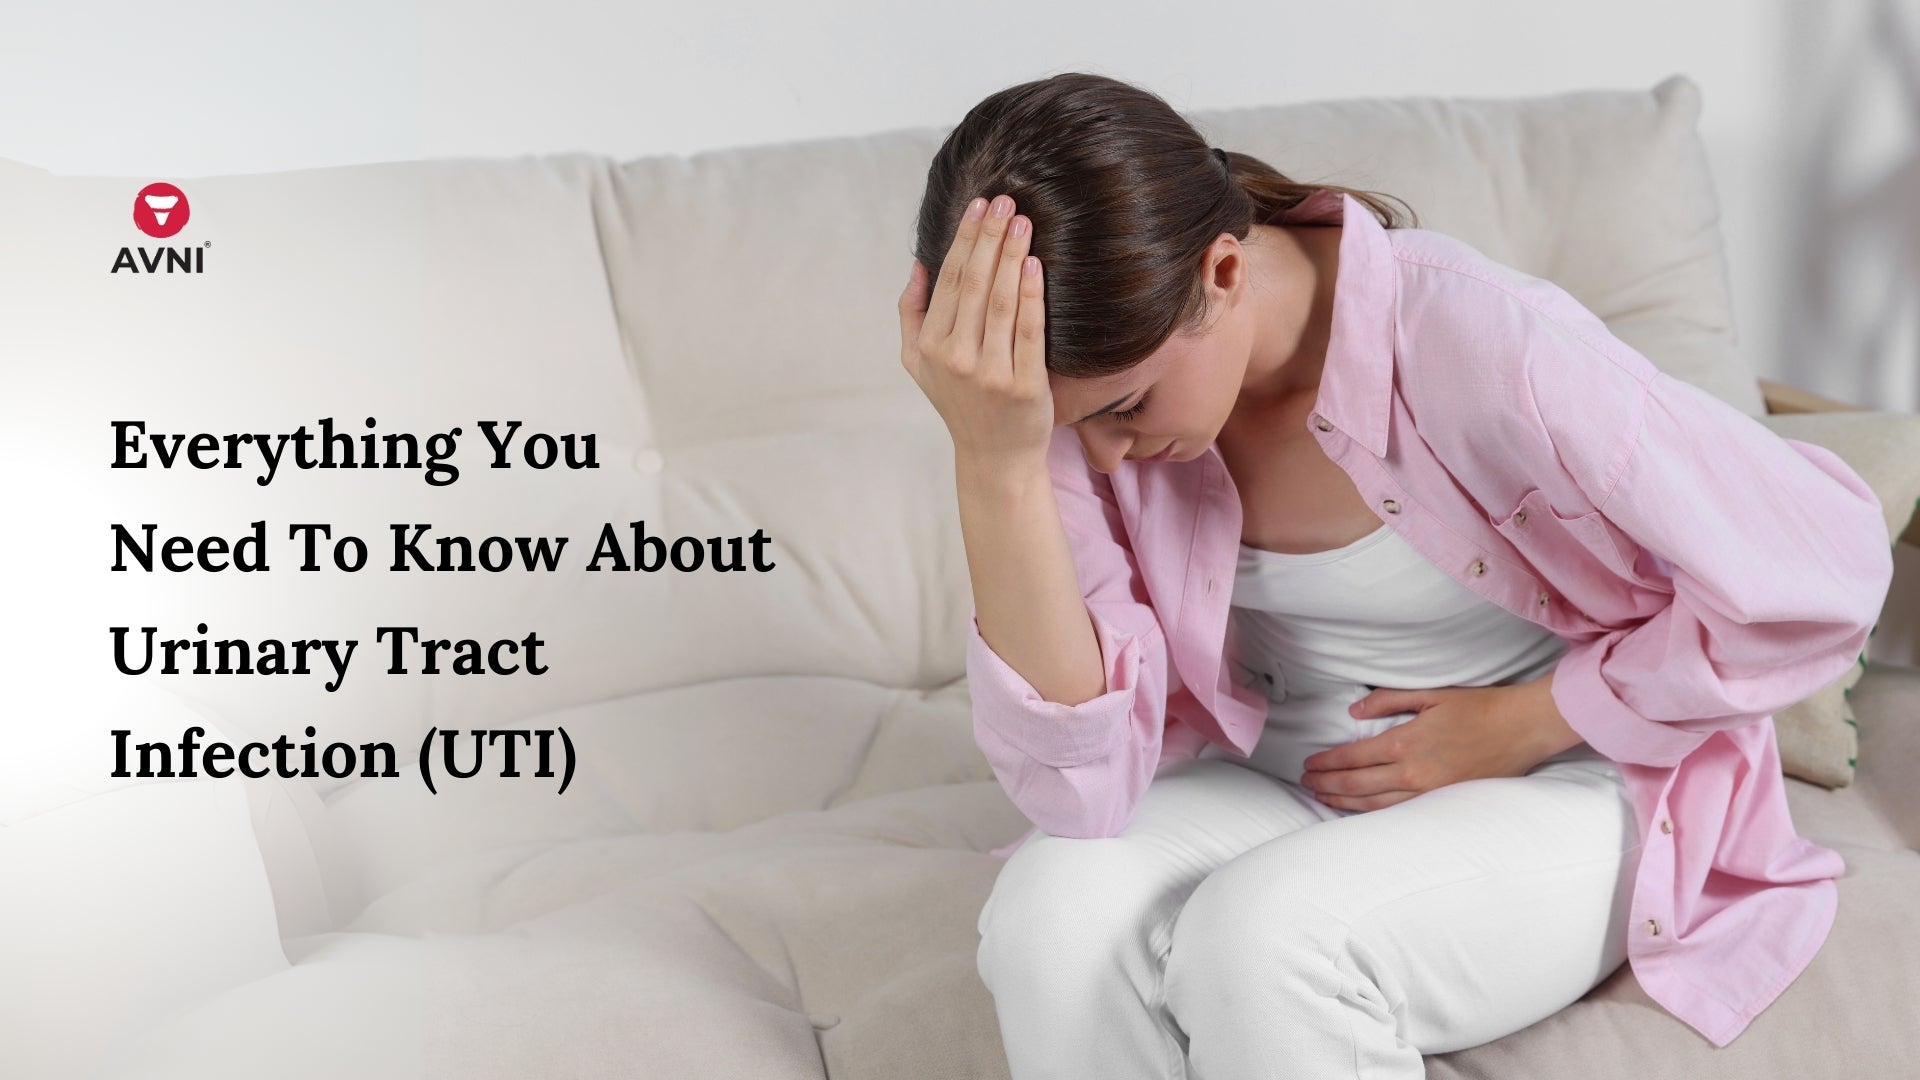 Everything You Need To Know About Urinary Tract Infection (UTI)